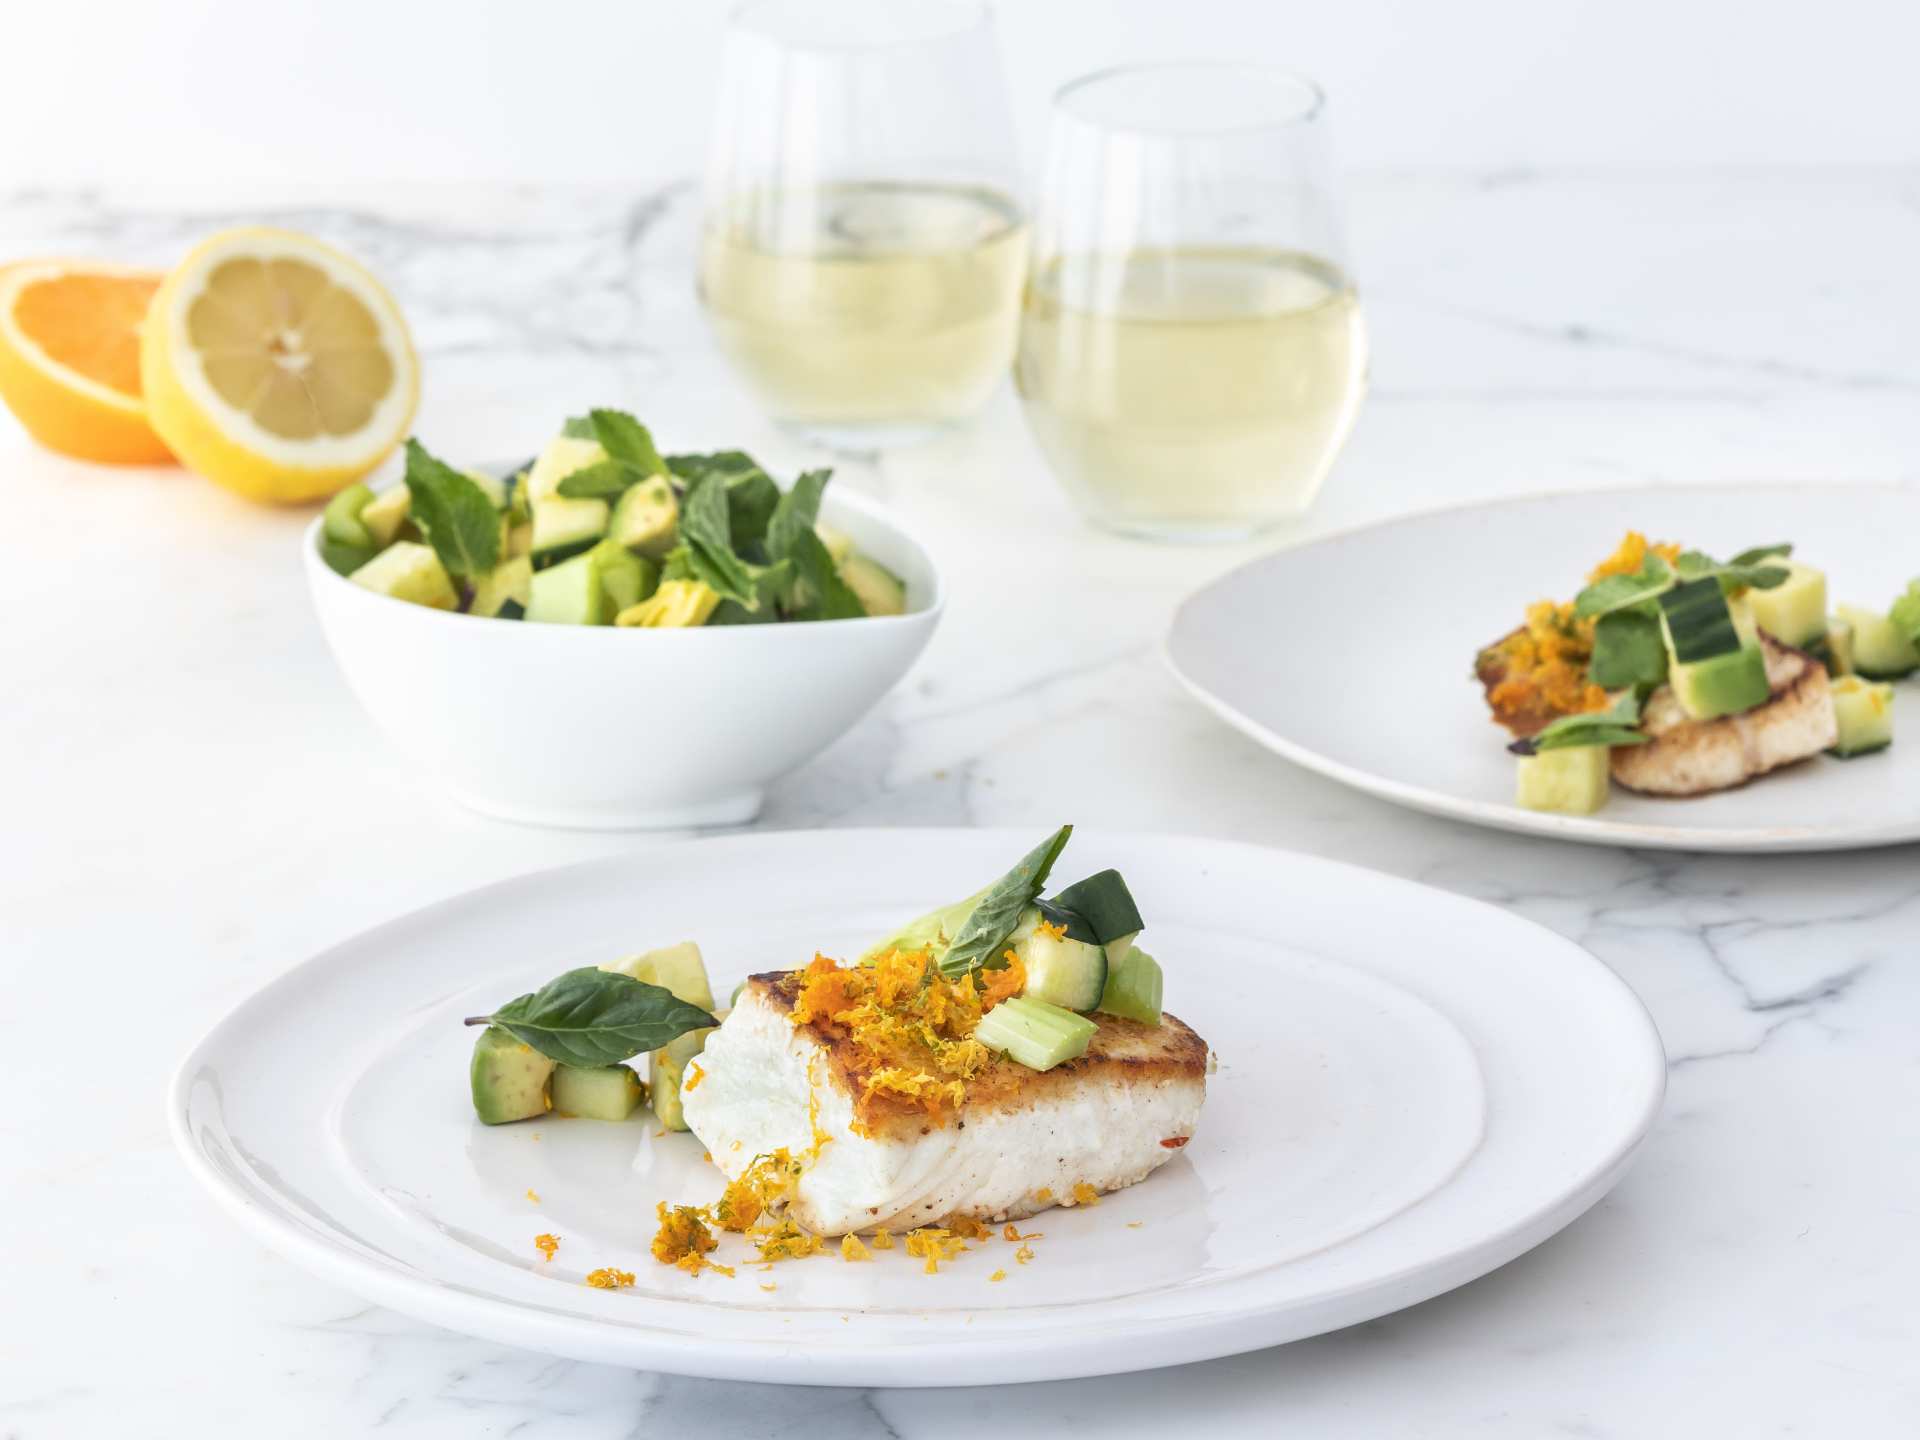 Sustainable seafood recipes | Citrus dusted wild halibut with fresh avocado salsa